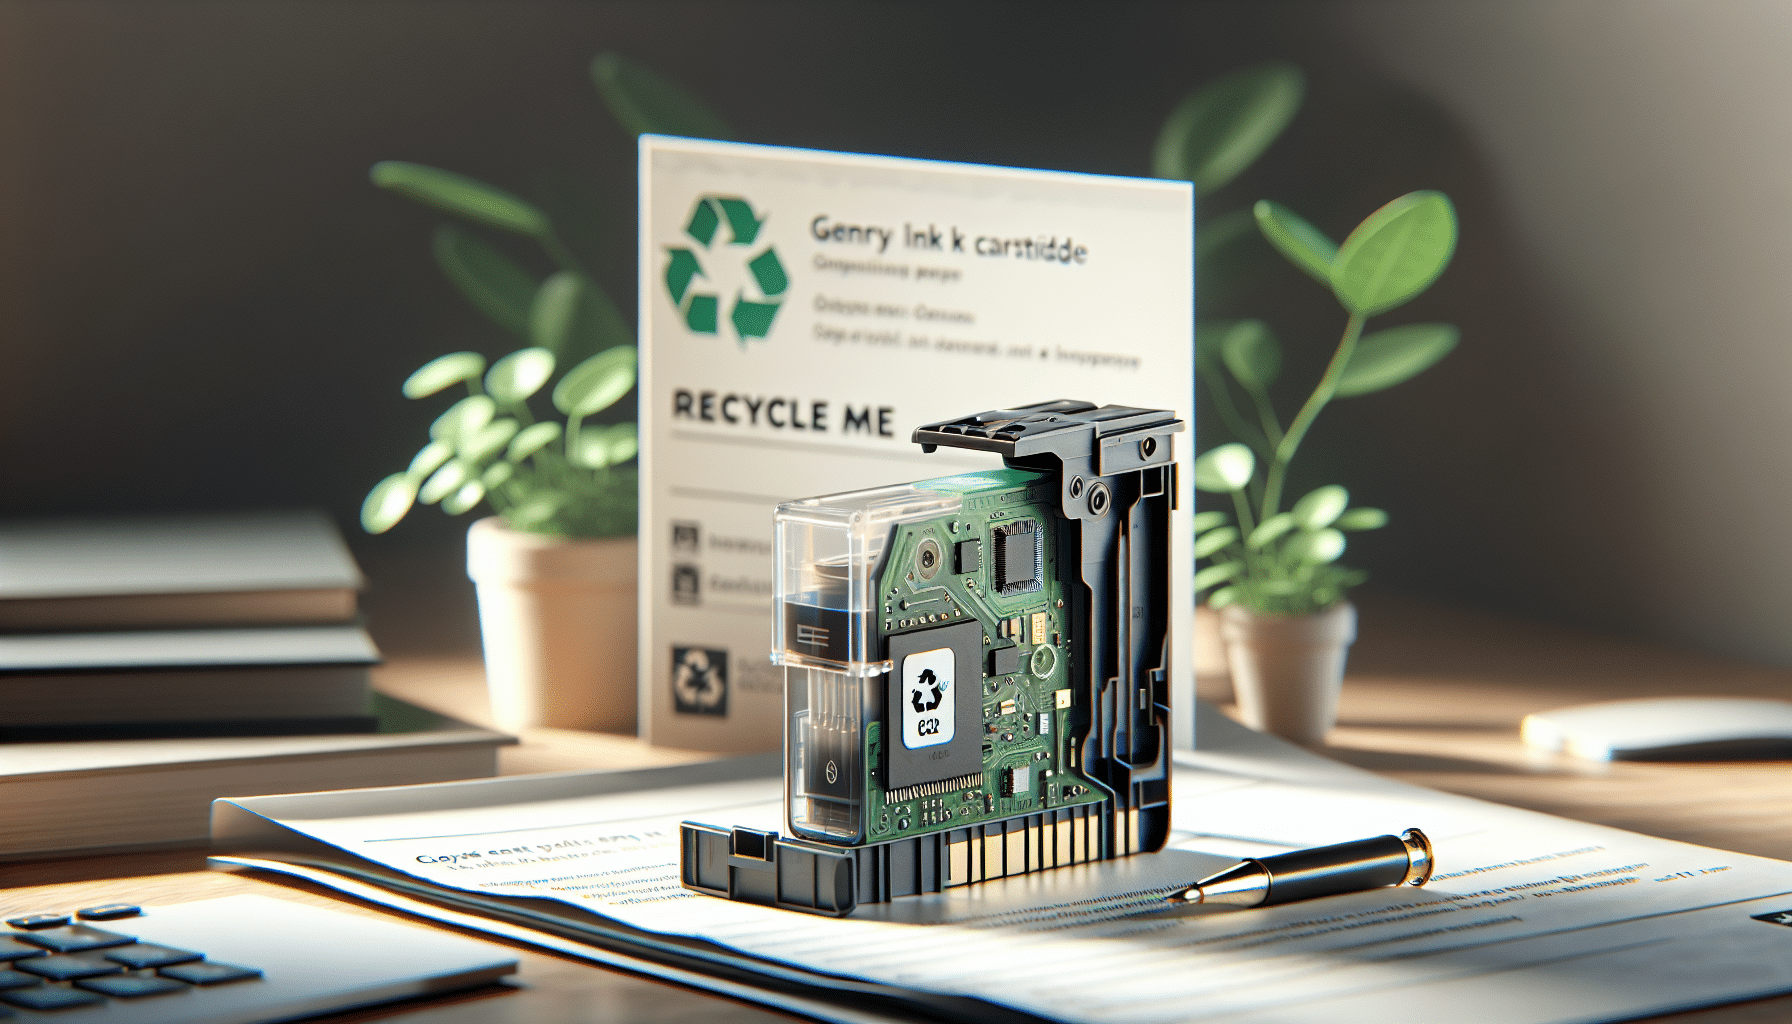 HP ink cartridge prepared for eco-friendly recycling